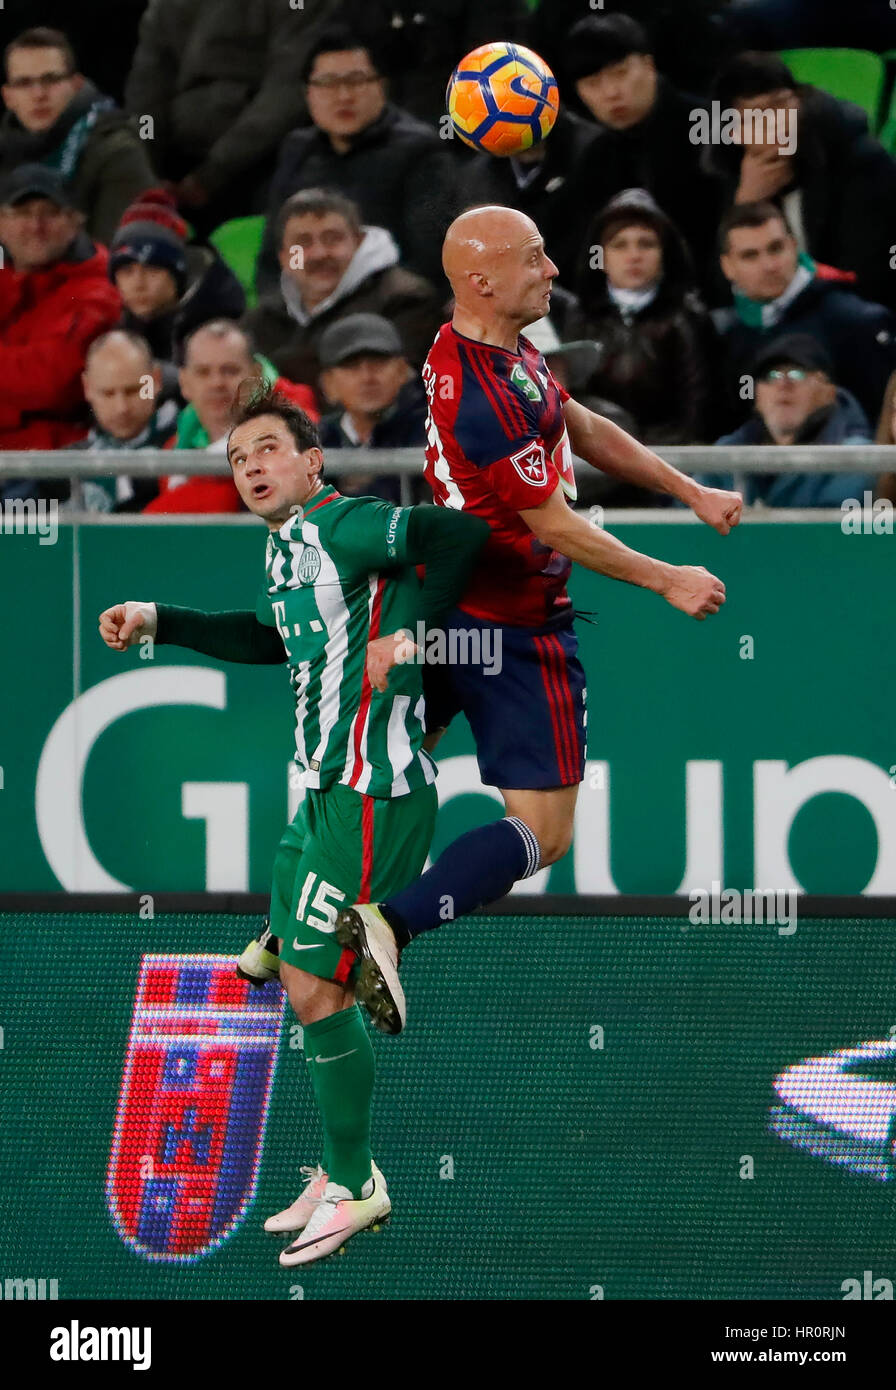 Budapest, Hungary. 25th February 2017. Tamas Hajnal #15 of Ferencvarosi TC battles for the ball in the air with Jozsef Varga (R) of Videoton FC during the Hungarian OTP Bank Liga match between Ferencvarosi TC and Videoton FC at Groupama Arena on February 25, 2017 in Budapest, Hungary. Credit: Laszlo Szirtesi/Alamy Live News Stock Photo